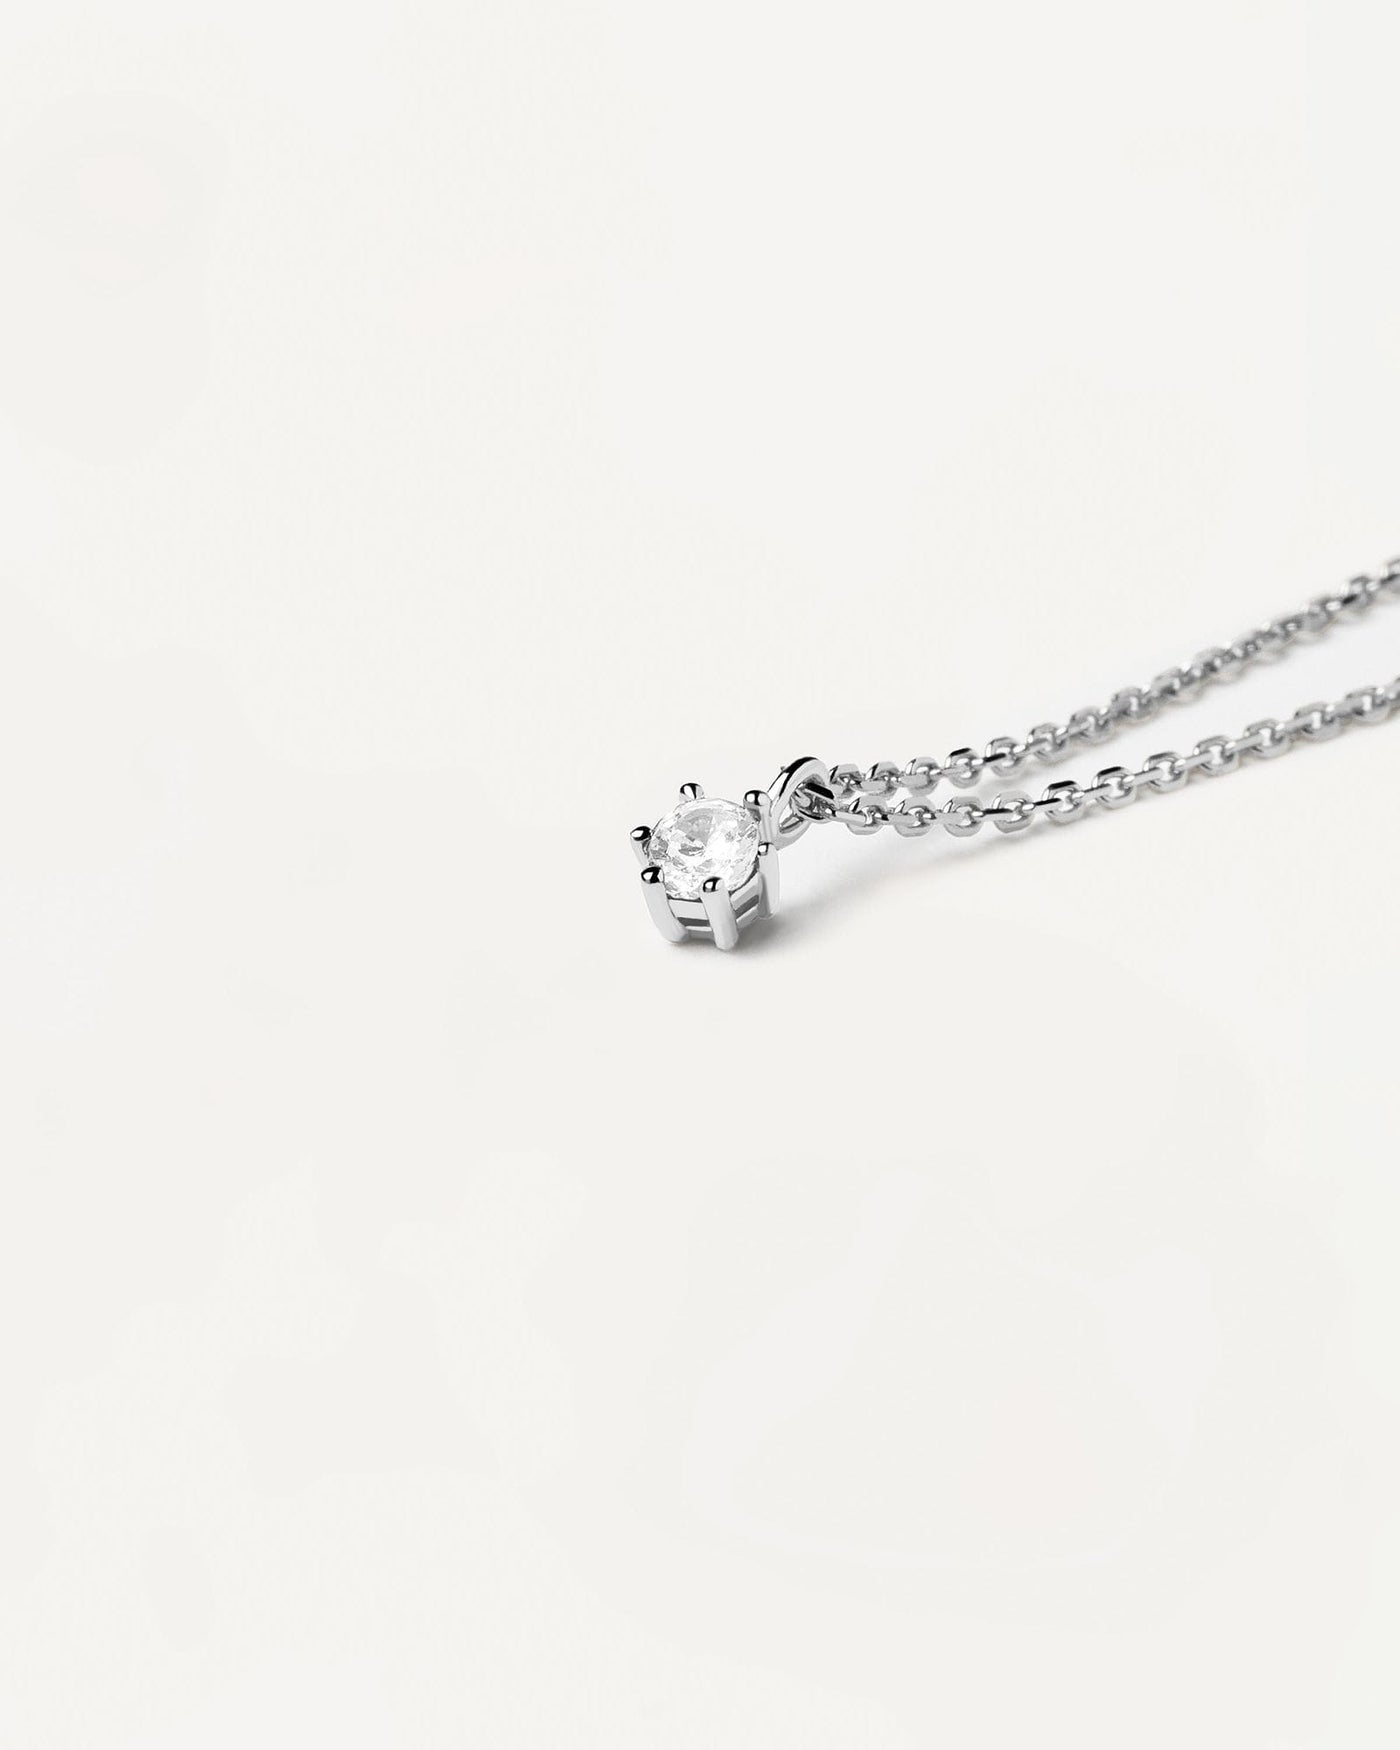 2024 Selection | White Solitary silver necklace. Single link chain necklace in sterling silver with a white zirconia on prongs. Get the latest arrival from PDPAOLA. Place your order safely and get this Best Seller. Free Shipping.